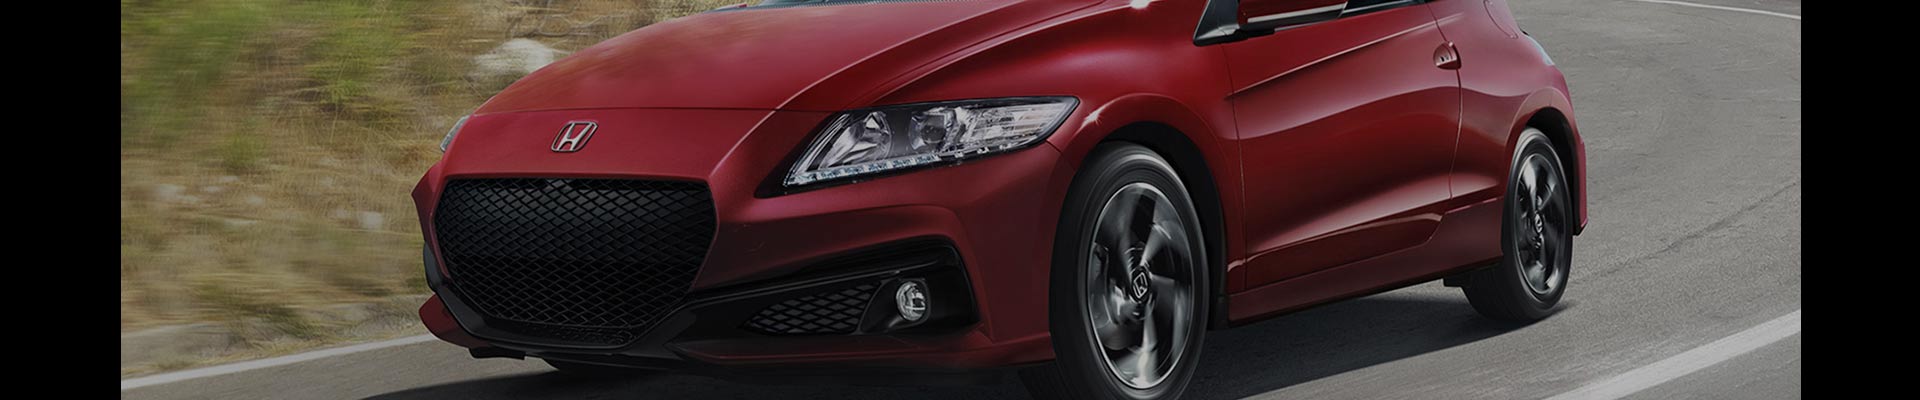 Shop Replacement and OEM 2015 Honda CR-Z Parts with Discounted Price on the Net